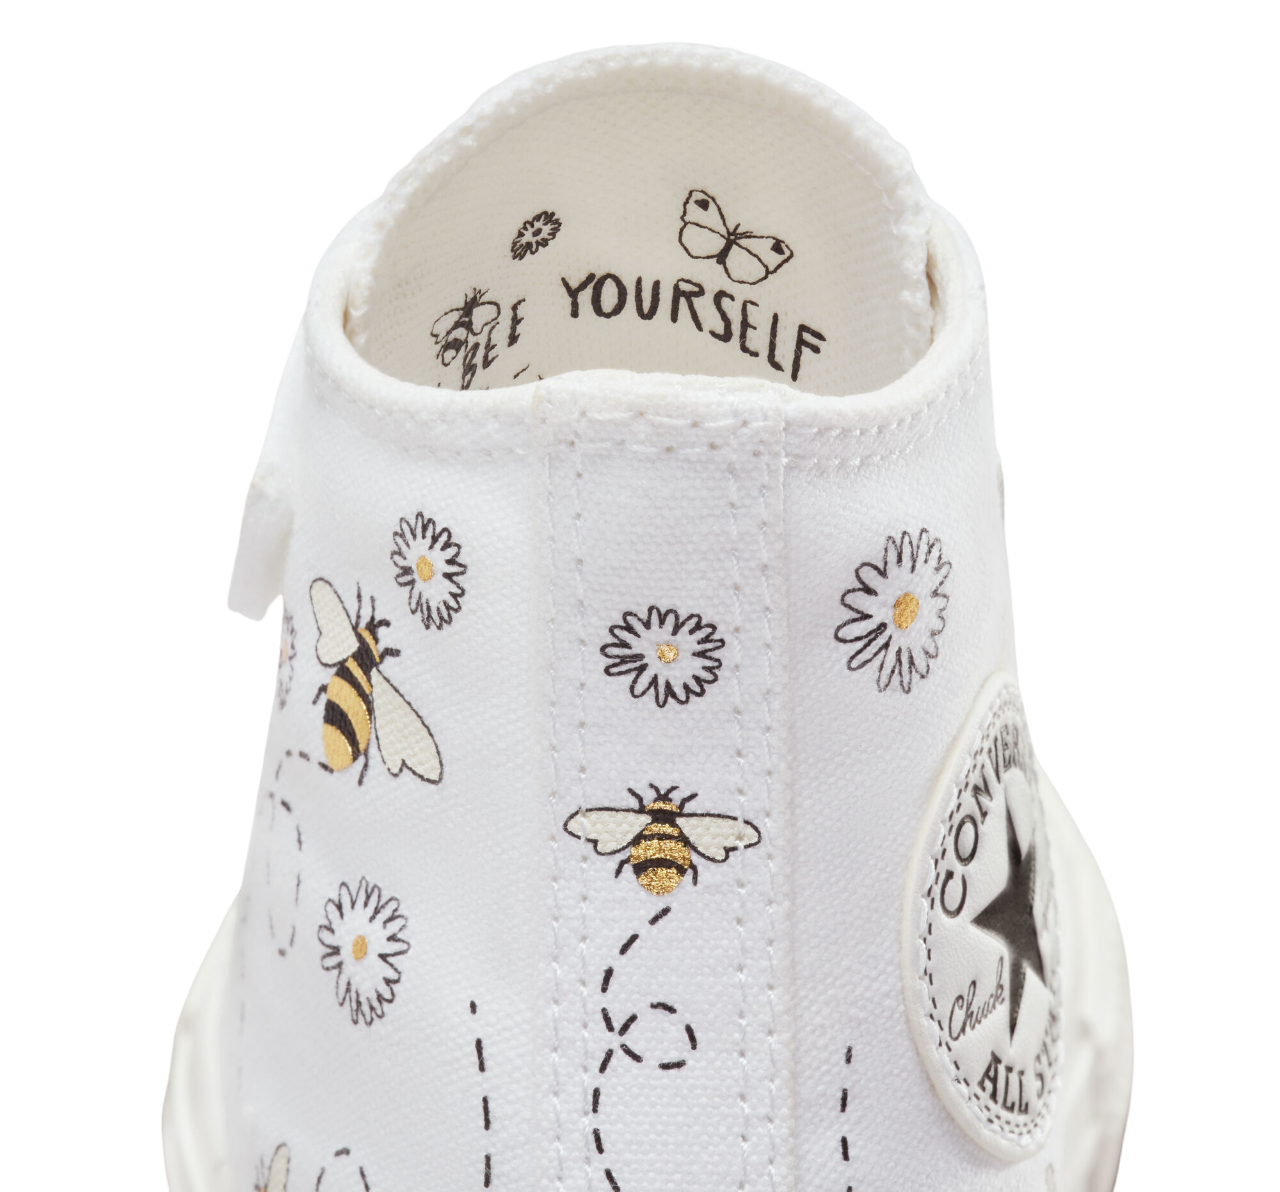 Converse Chuck Taylor All Star Easy-On Bees scarpa in tela alta A01619C white-black-yellow